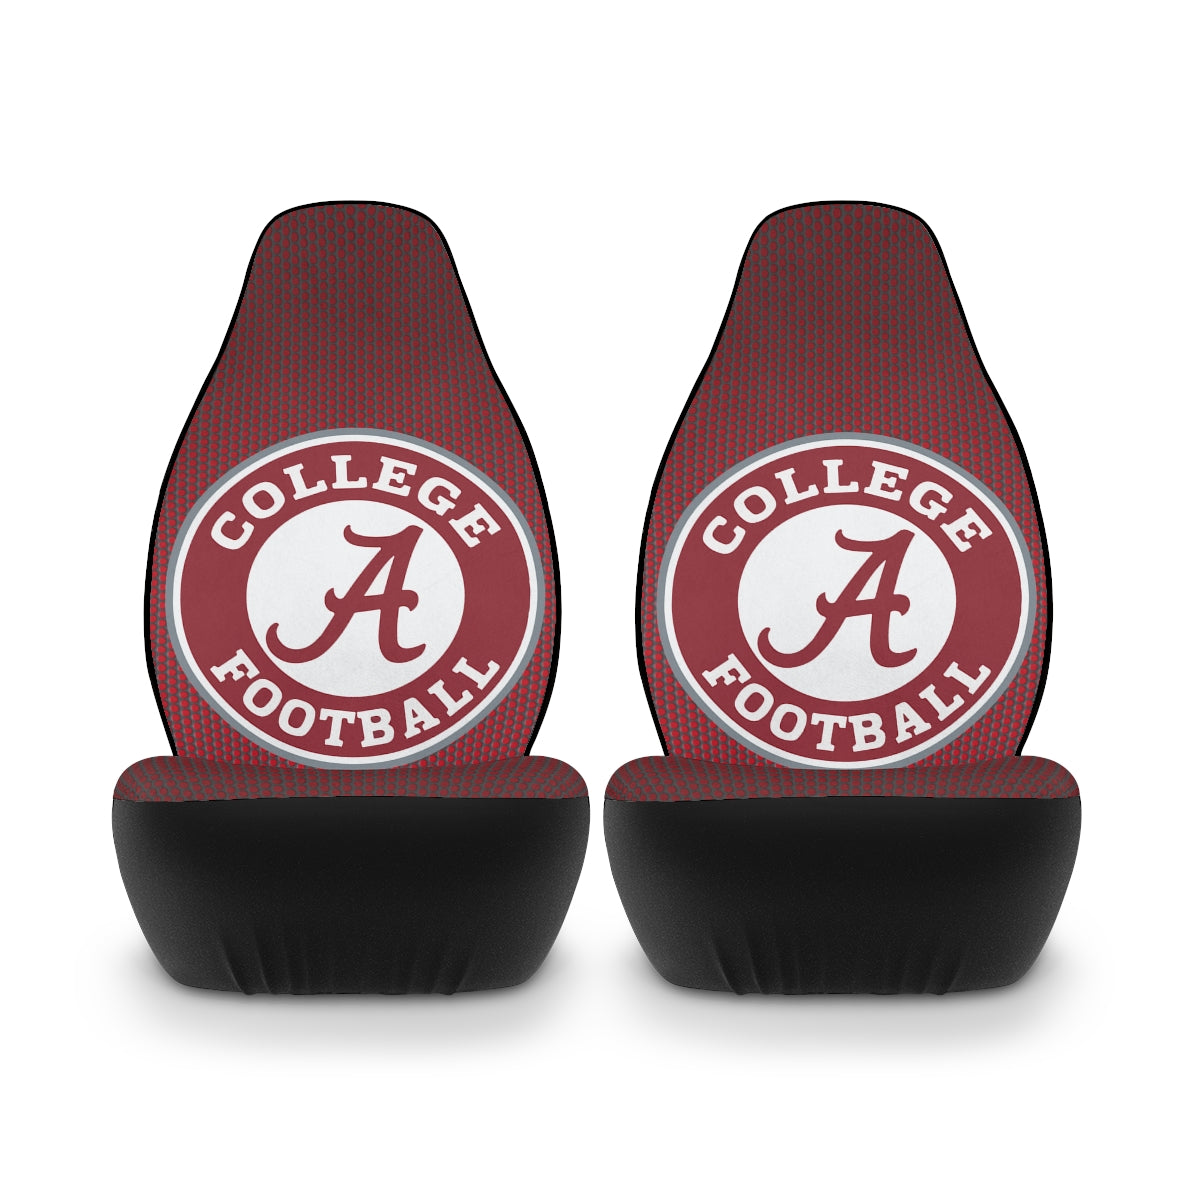 Alabama Car Seat Covers: Show your state pride on the go. Durable, stylish protection for your car seats. Drive with Alabama flair! 🚗🌟